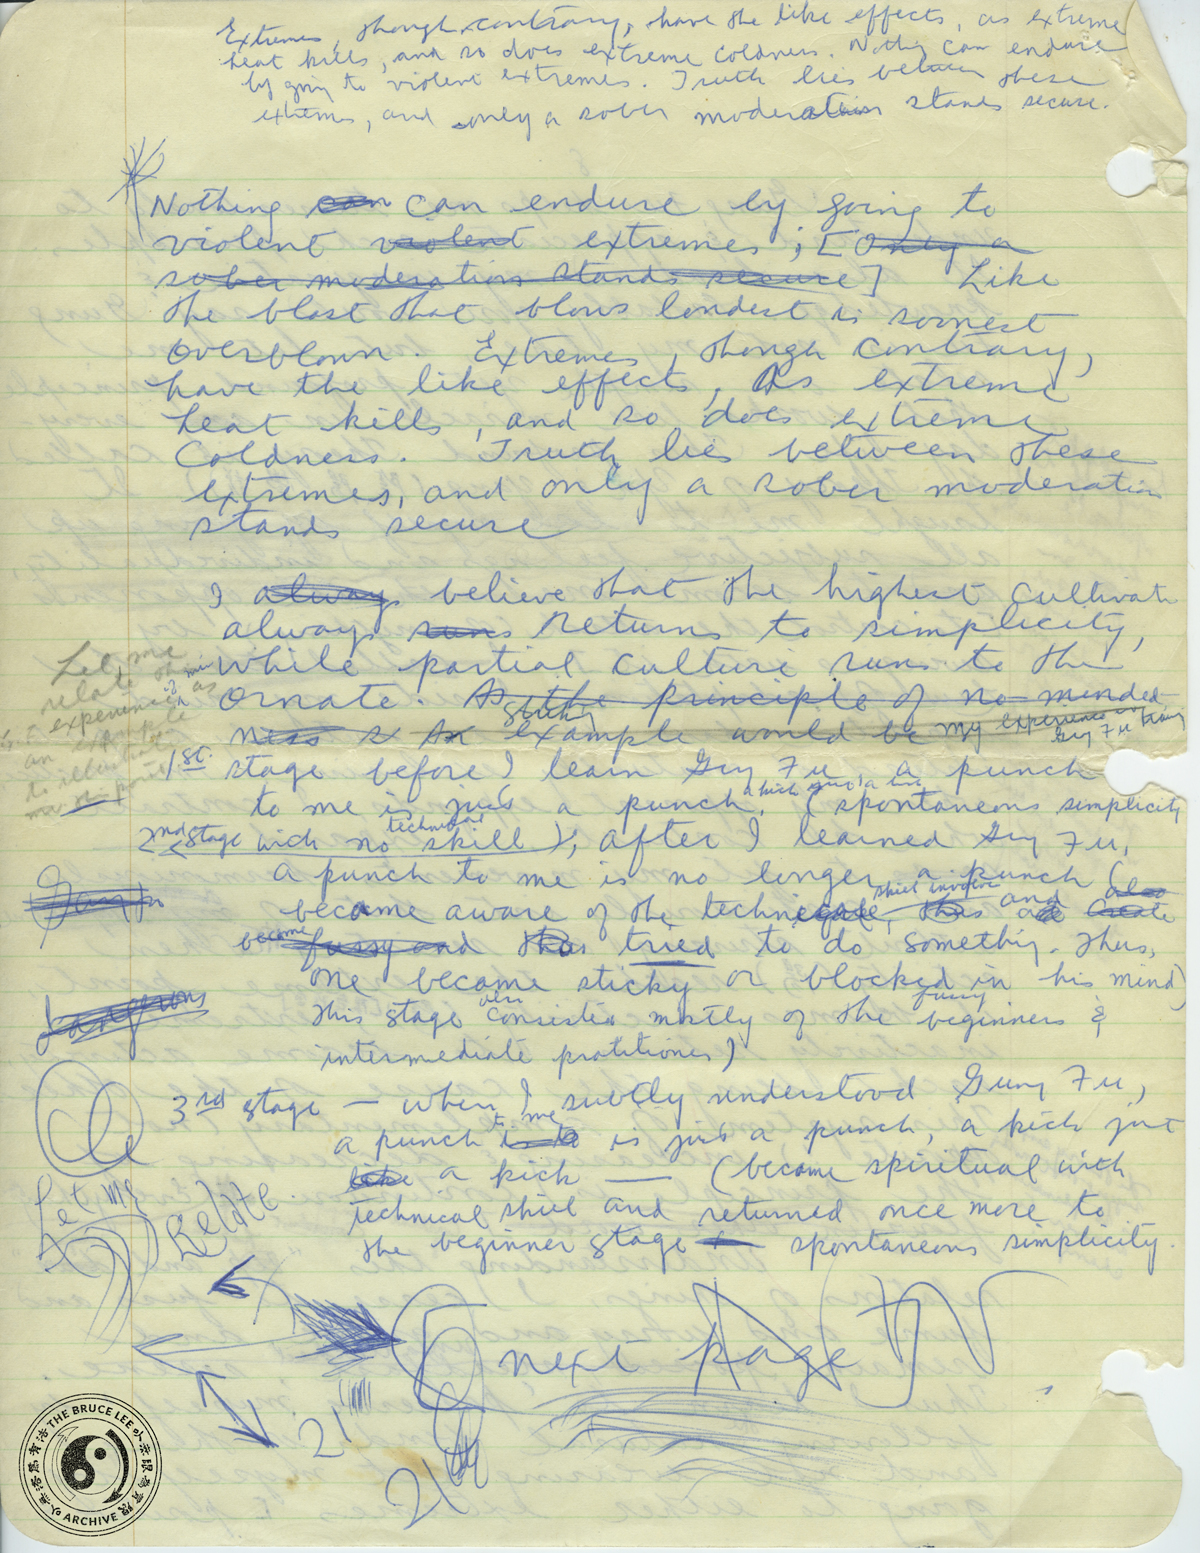 Letter-to-Pearl-draft-pg.9-archive.jpg